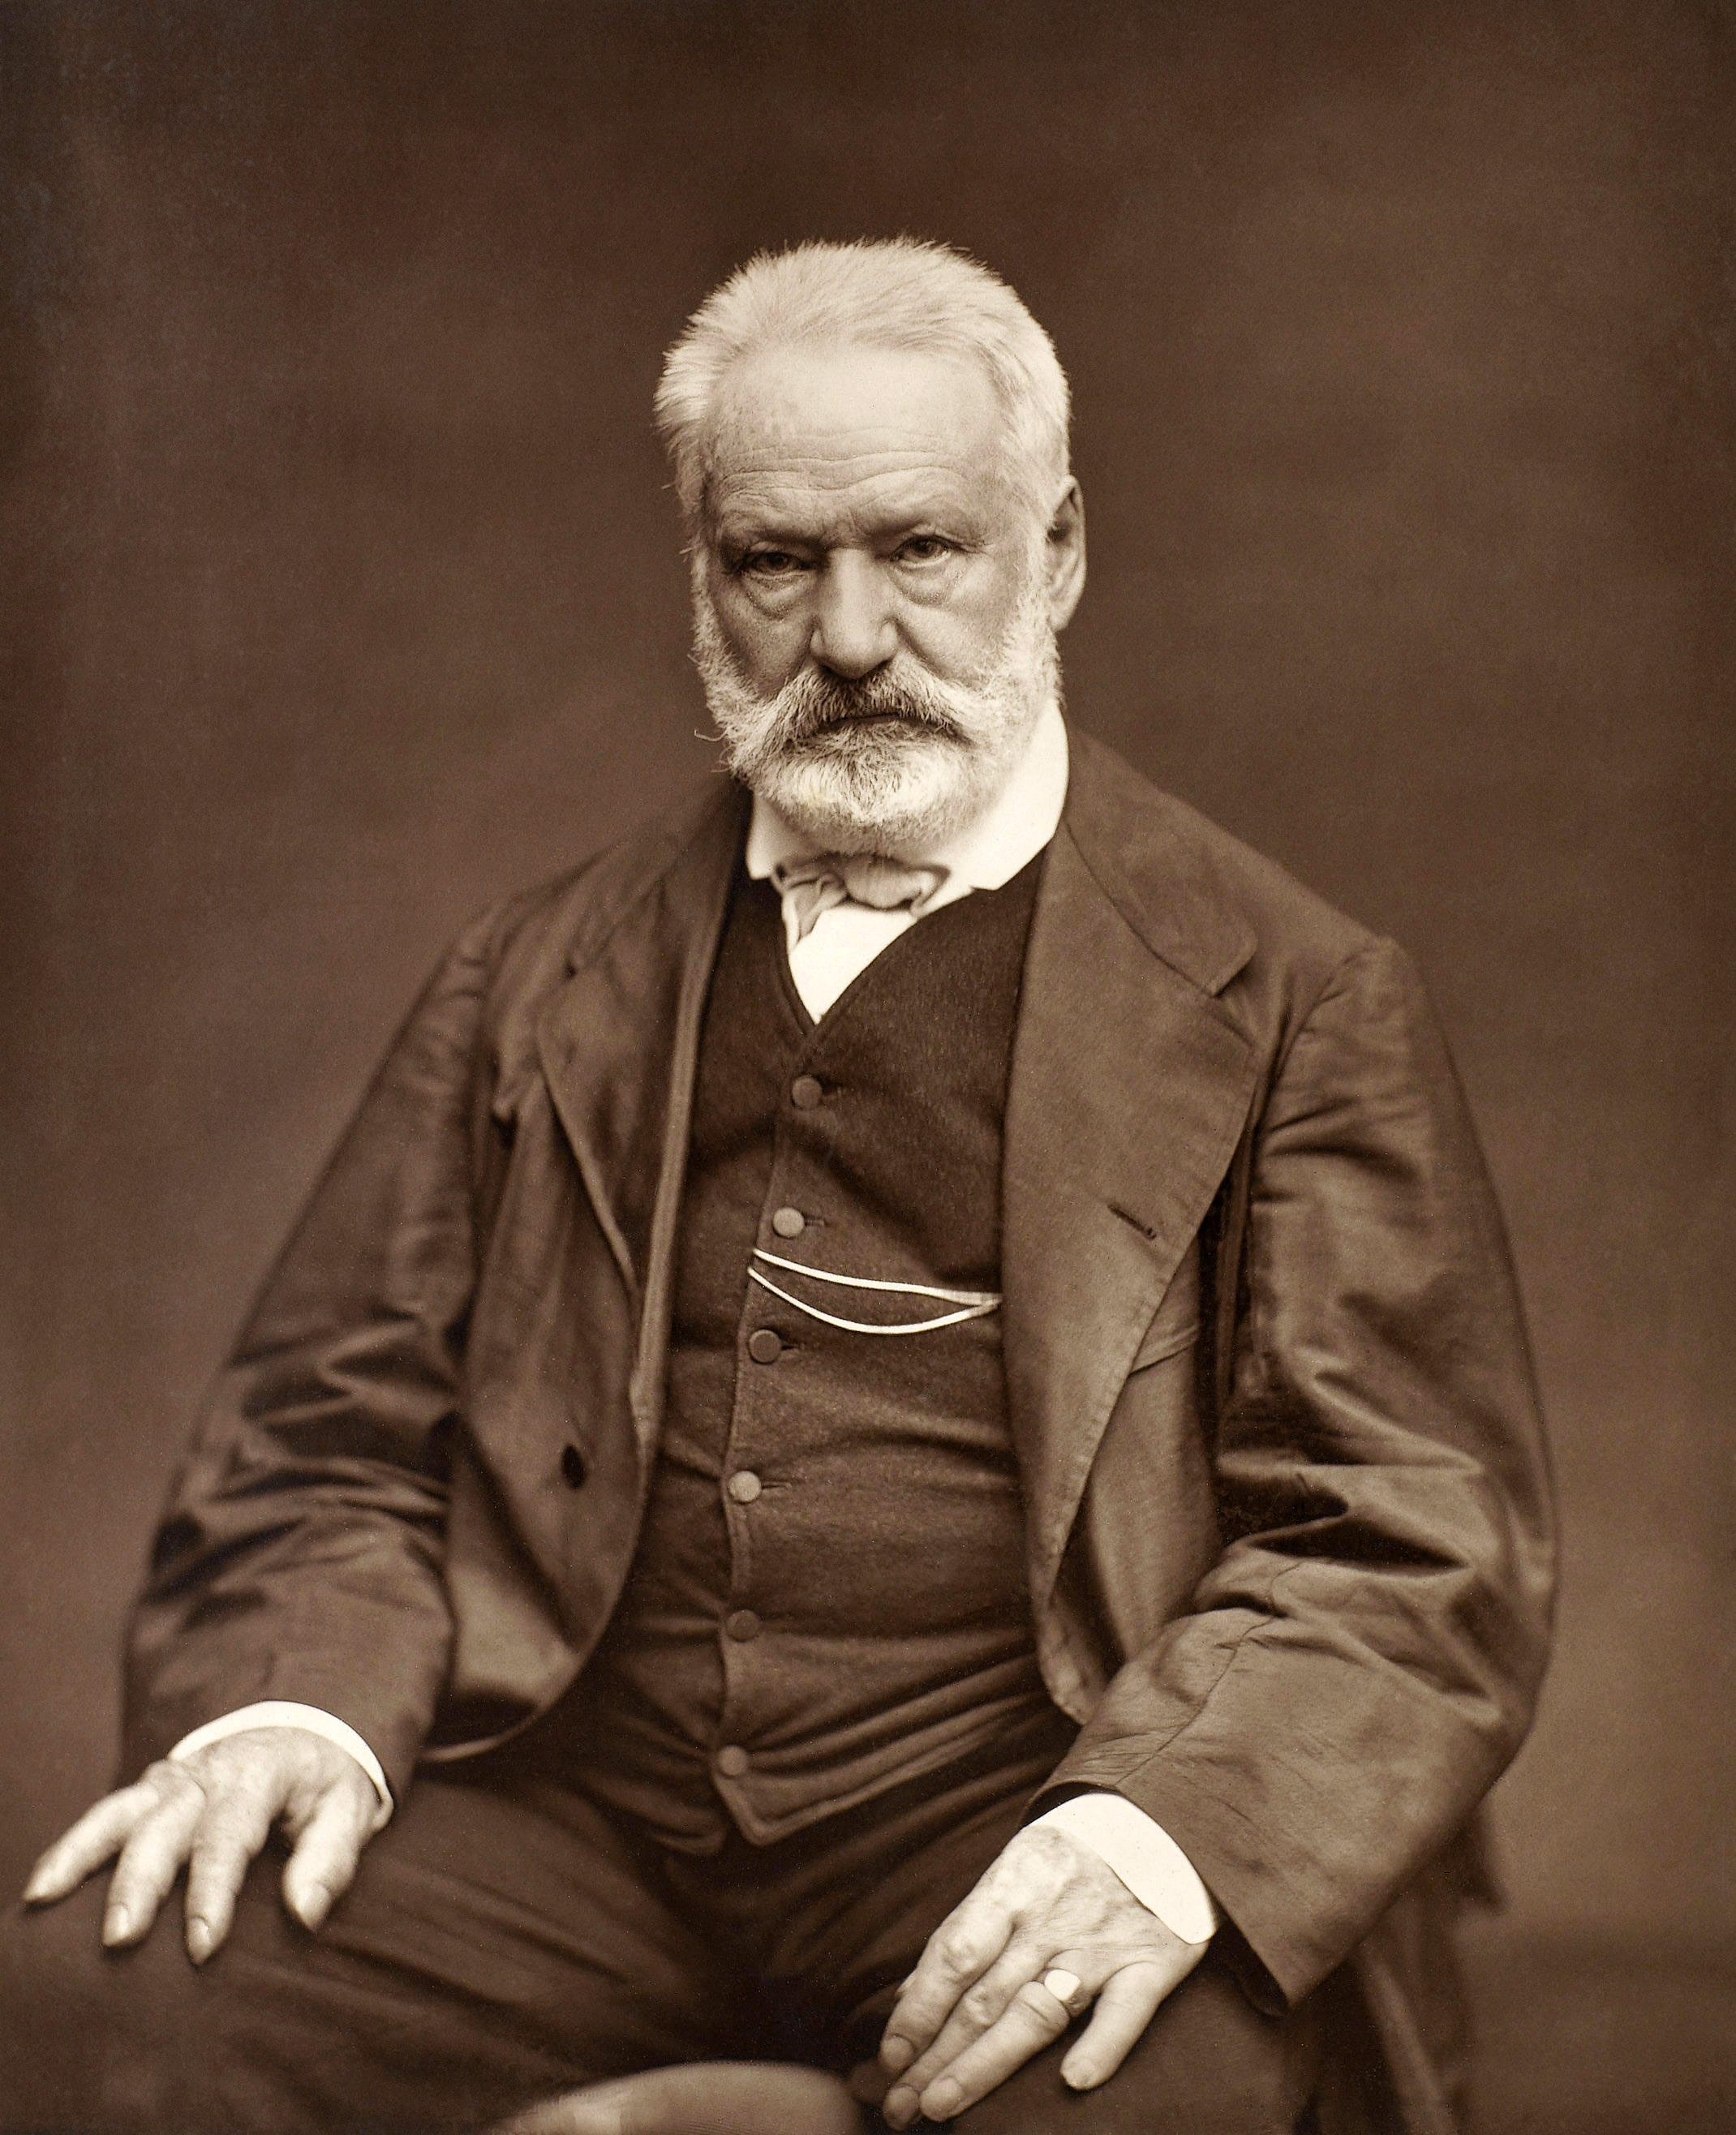 A photograph of French poet and author Victor Hugo.